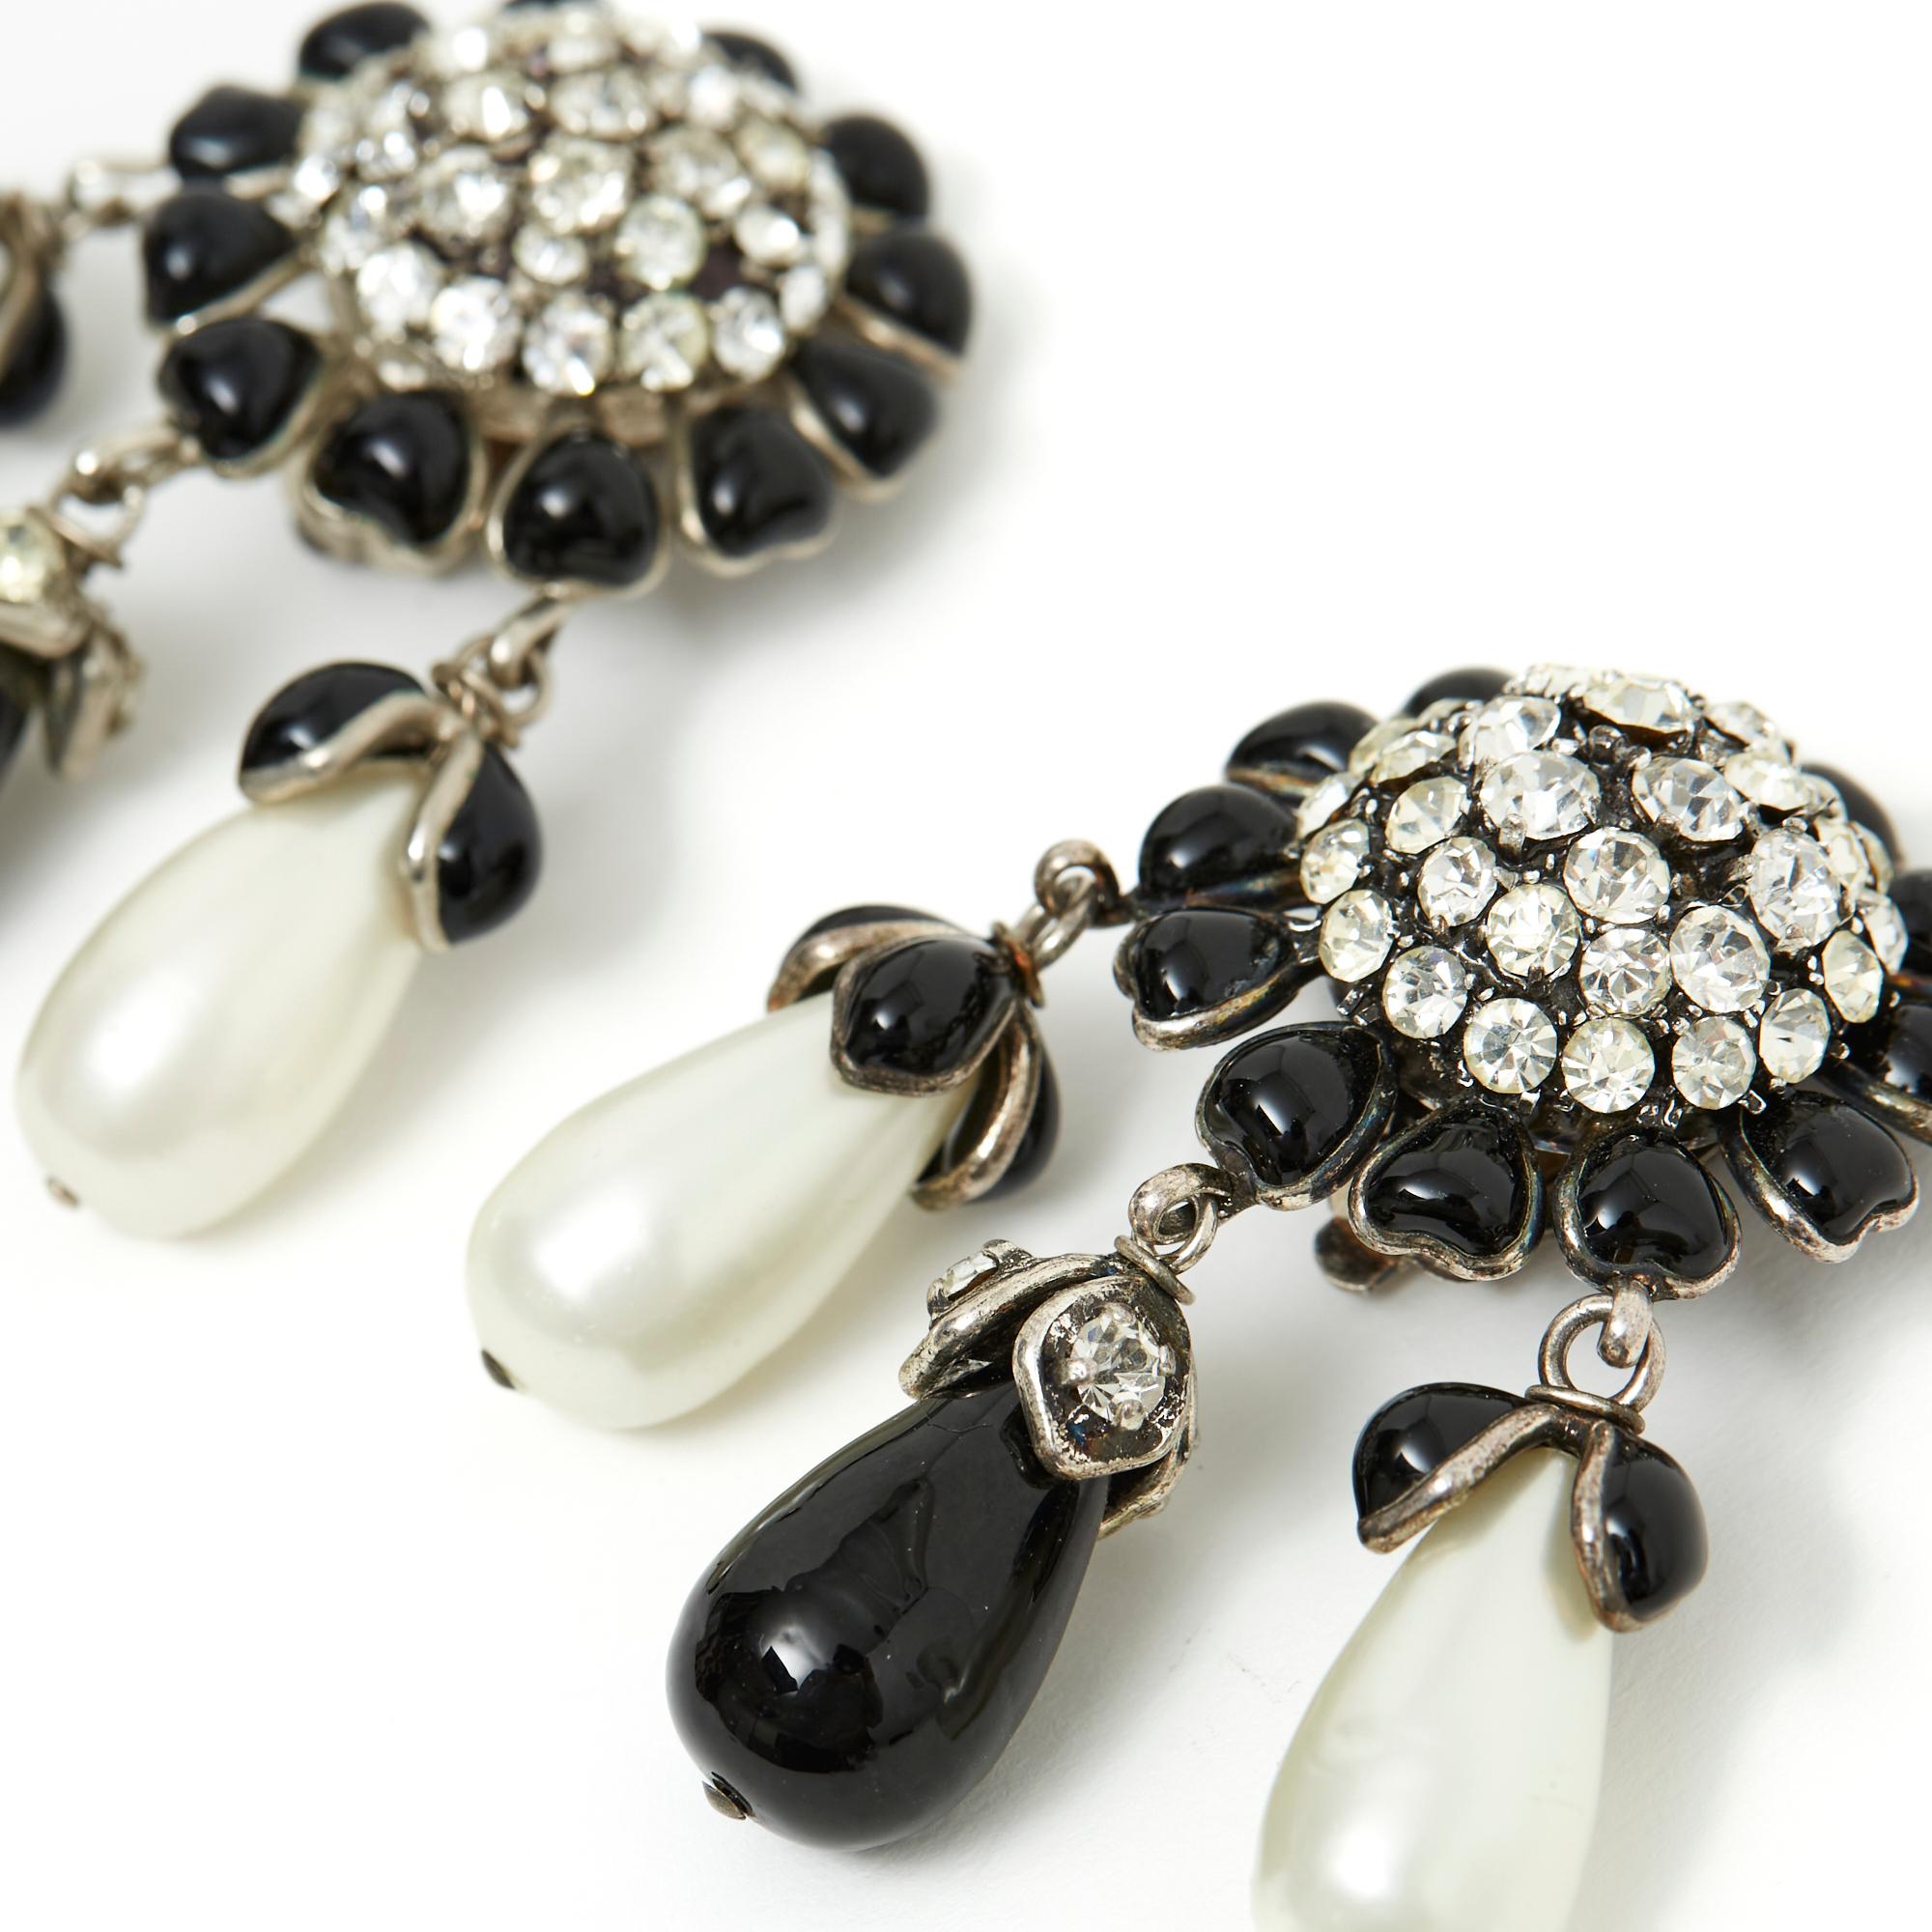 Chanel Haute couture clip-on earrings in silver metal, black glass paste cabochons in a circle around a white rhinestone dome, drop pearl pendants in black or white pearly glass paste. Width 4 cm x height 5.9 cm. The earrings are probably vintage,